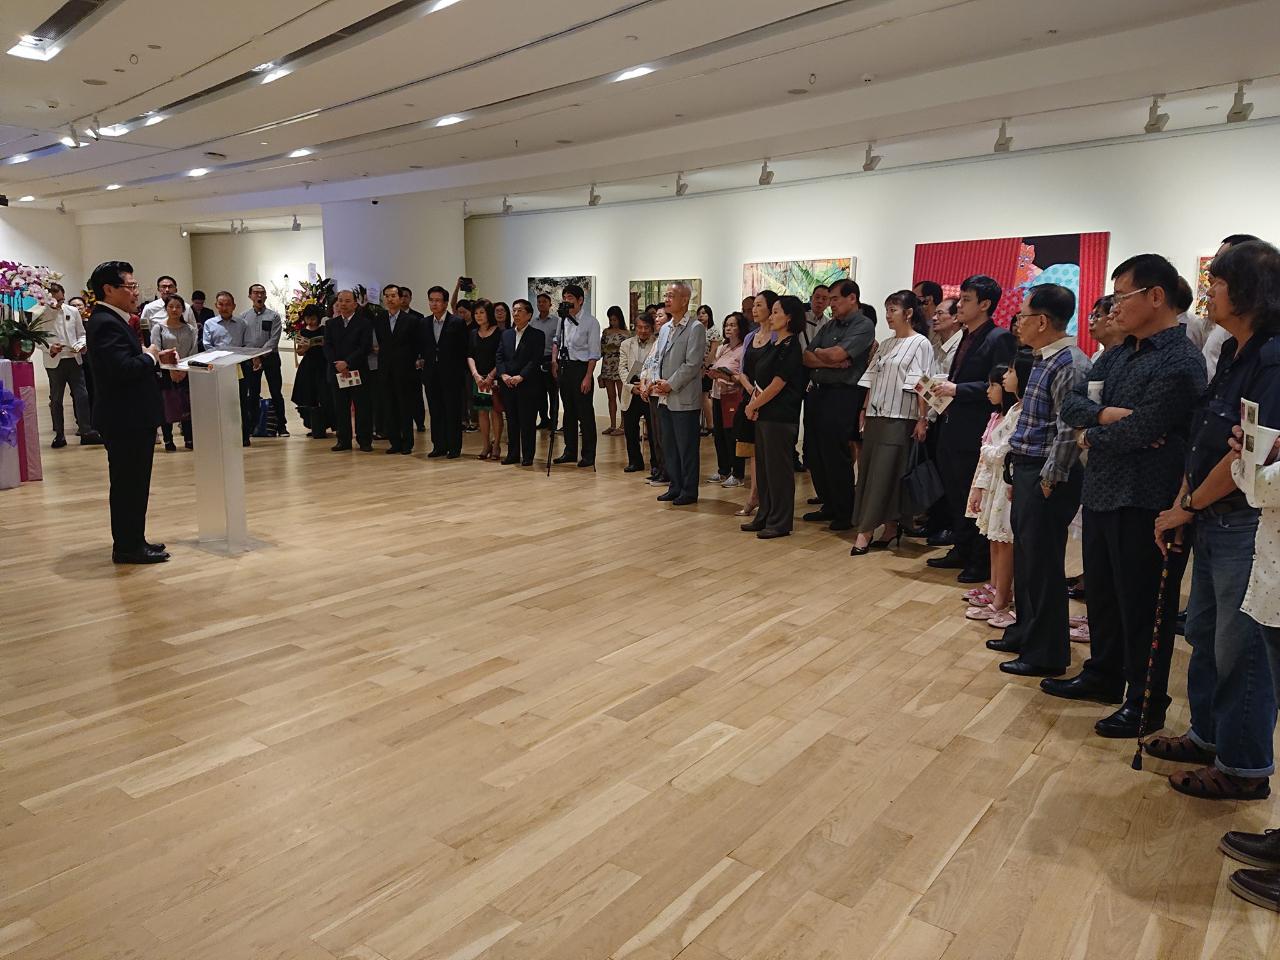 Over 120 personalities from the arts, academia and media in Singapore were at the opening of the “Taiwan in Full Bloom: Contemporary Arts of Taiwan” exhibition.